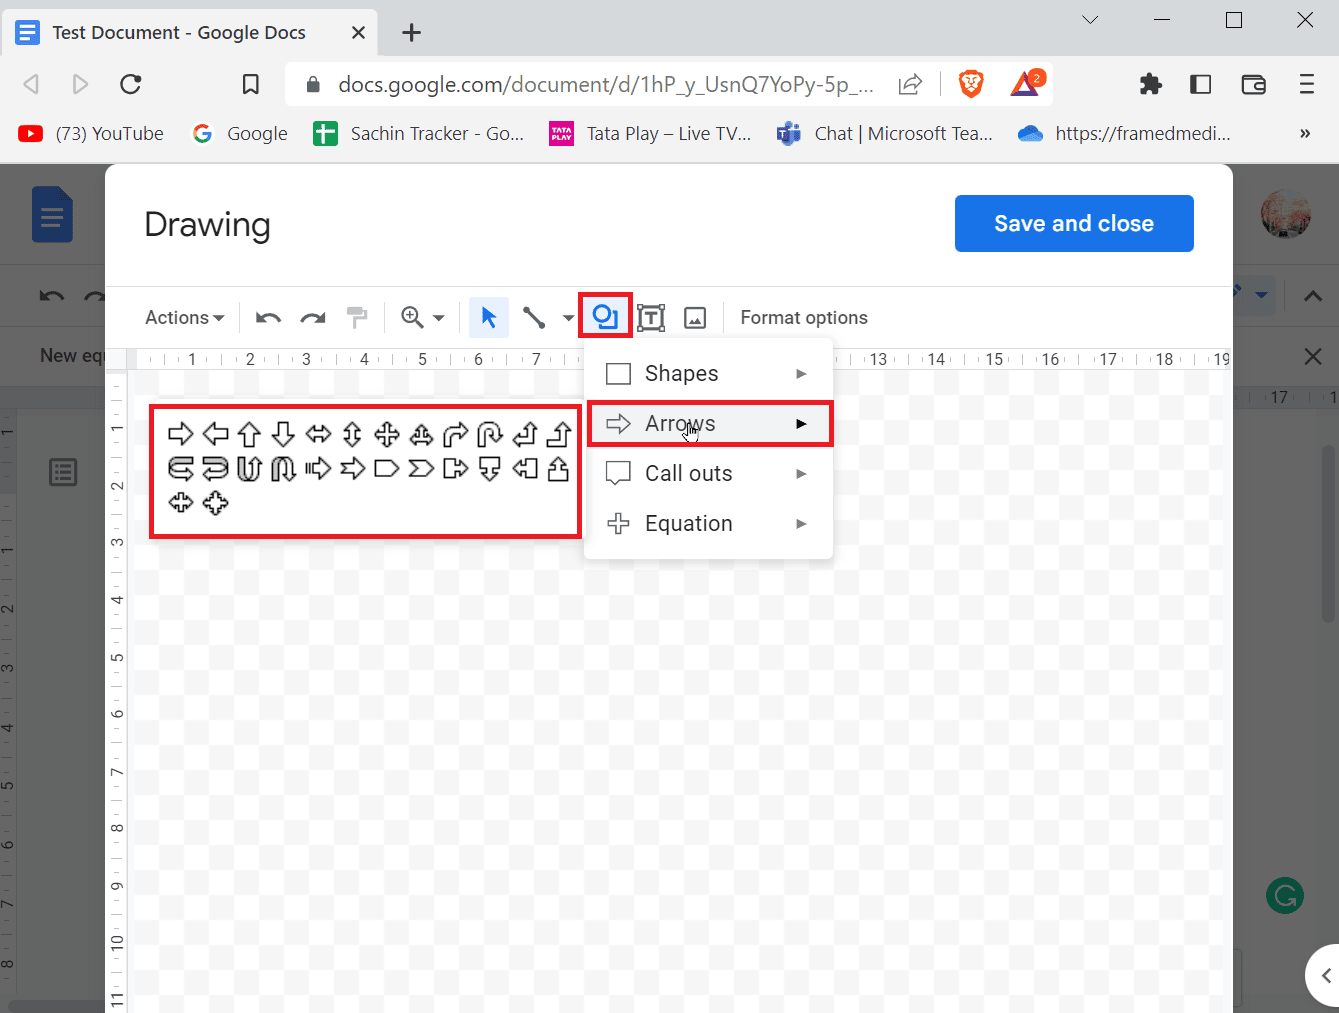 Click on the Shapes icon and then click on Arrows